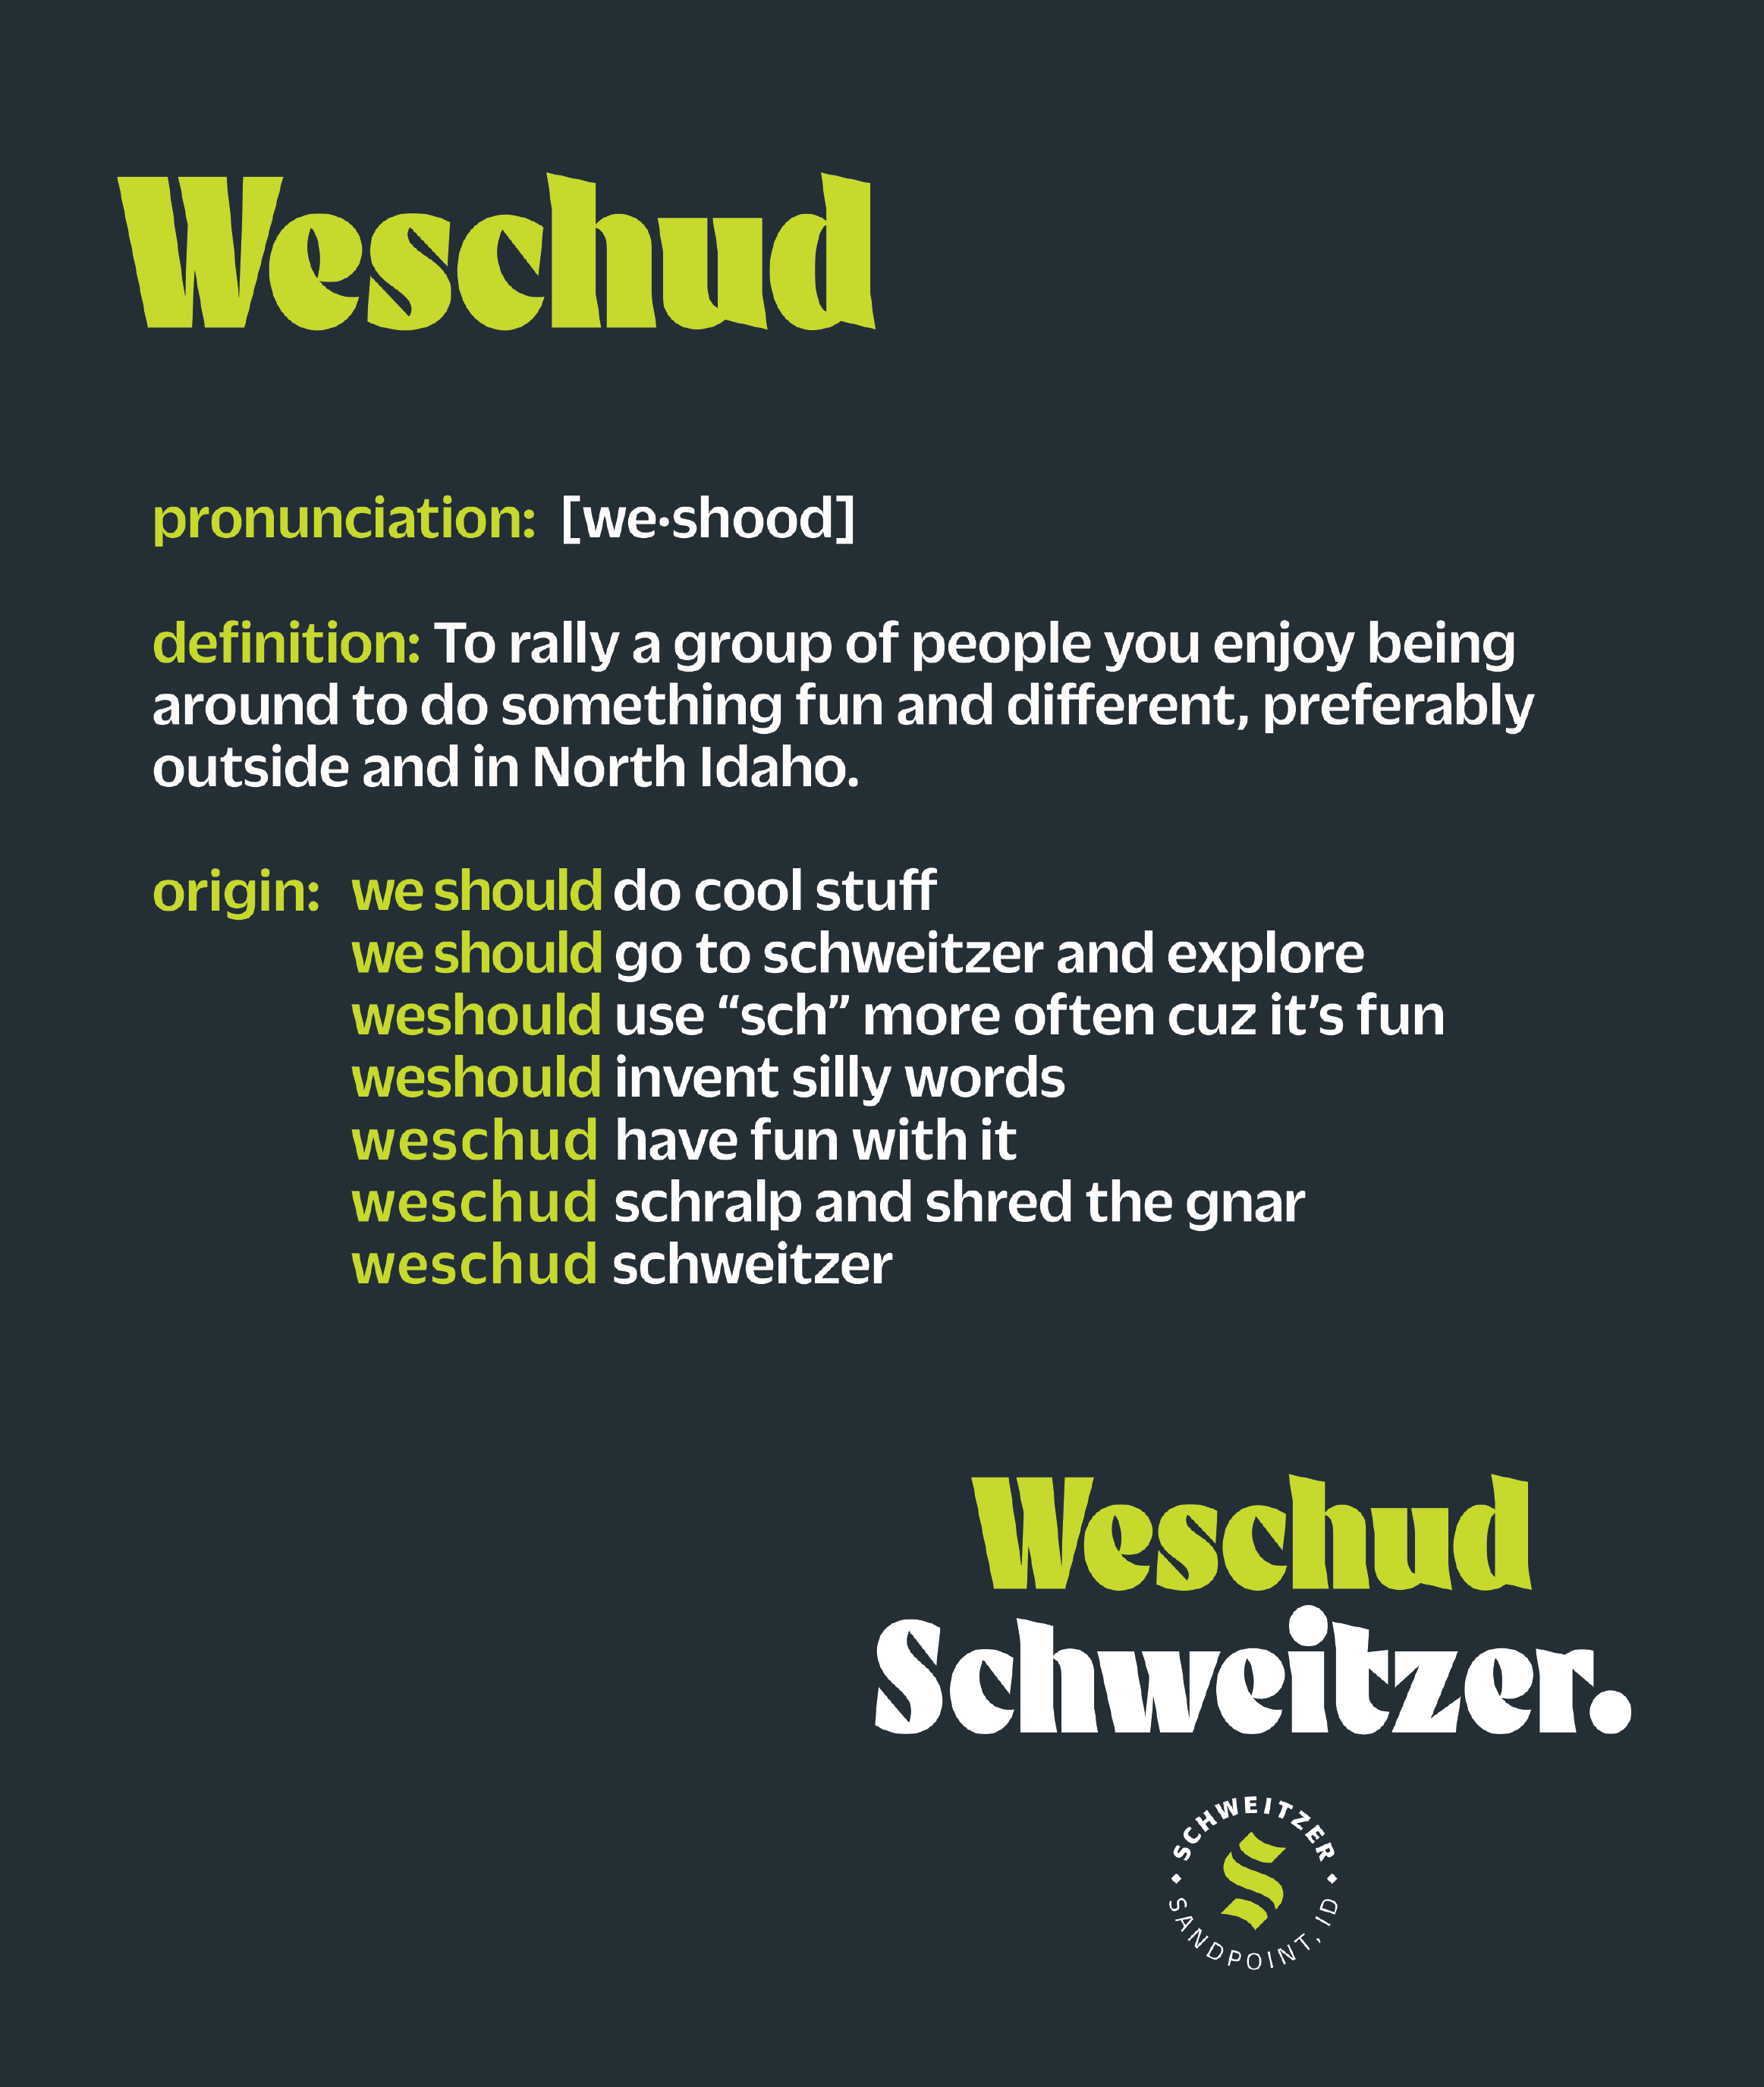 Mock definition of our made up word Weschud